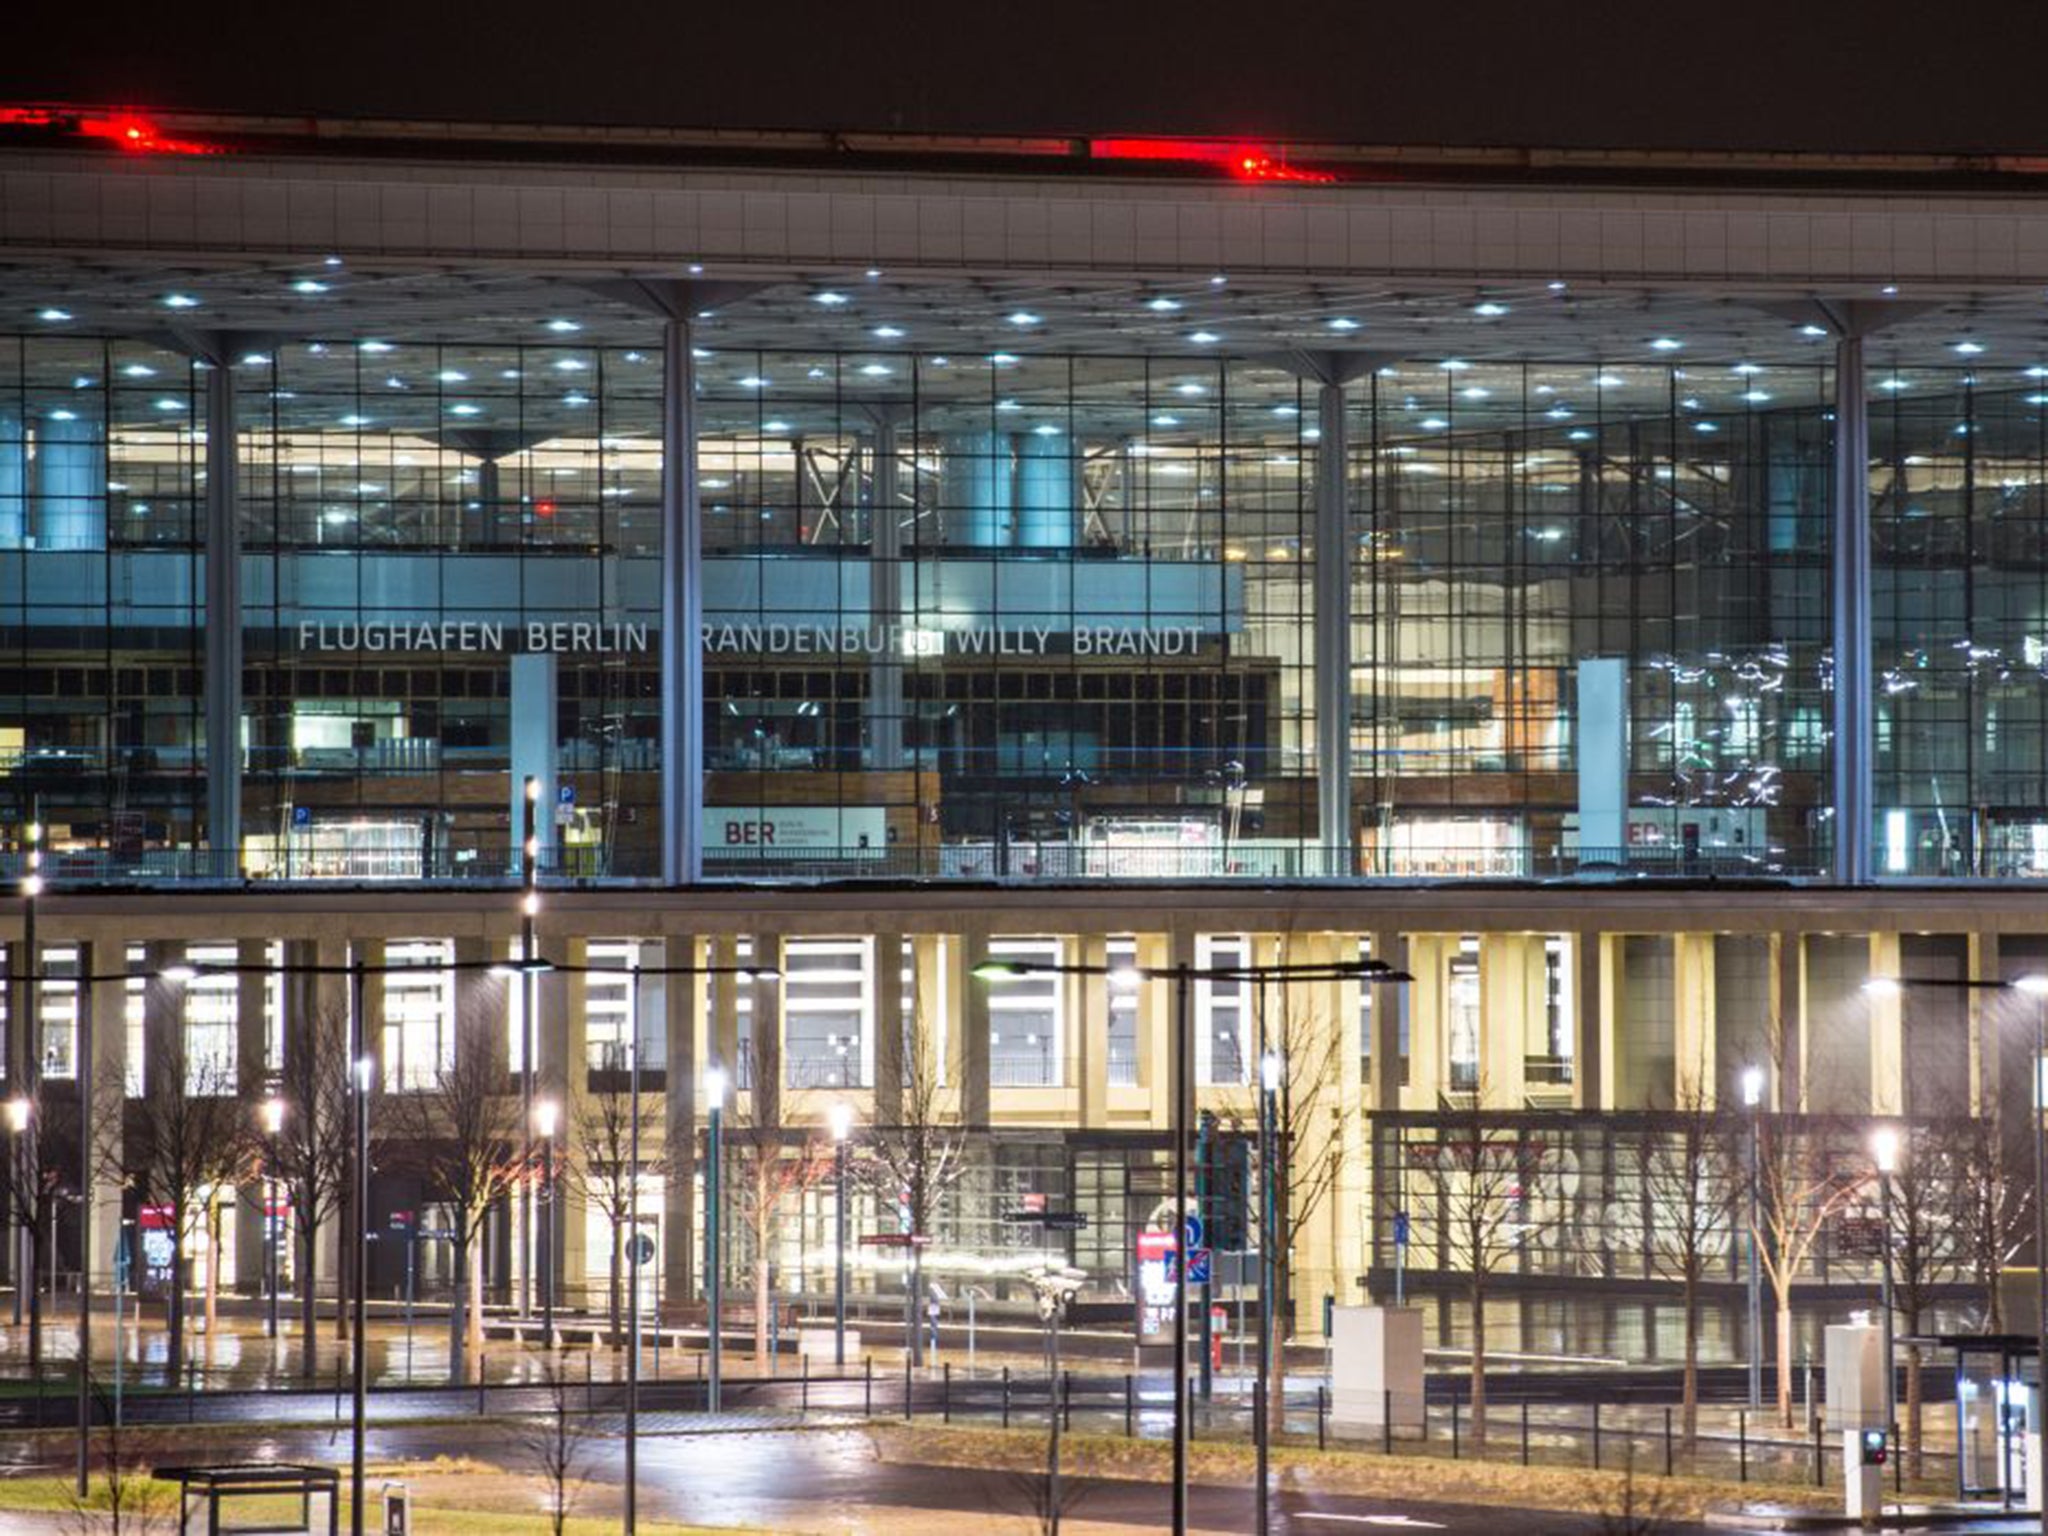 Willy Brandt airport was first scheduled to open in 2010 (AP)